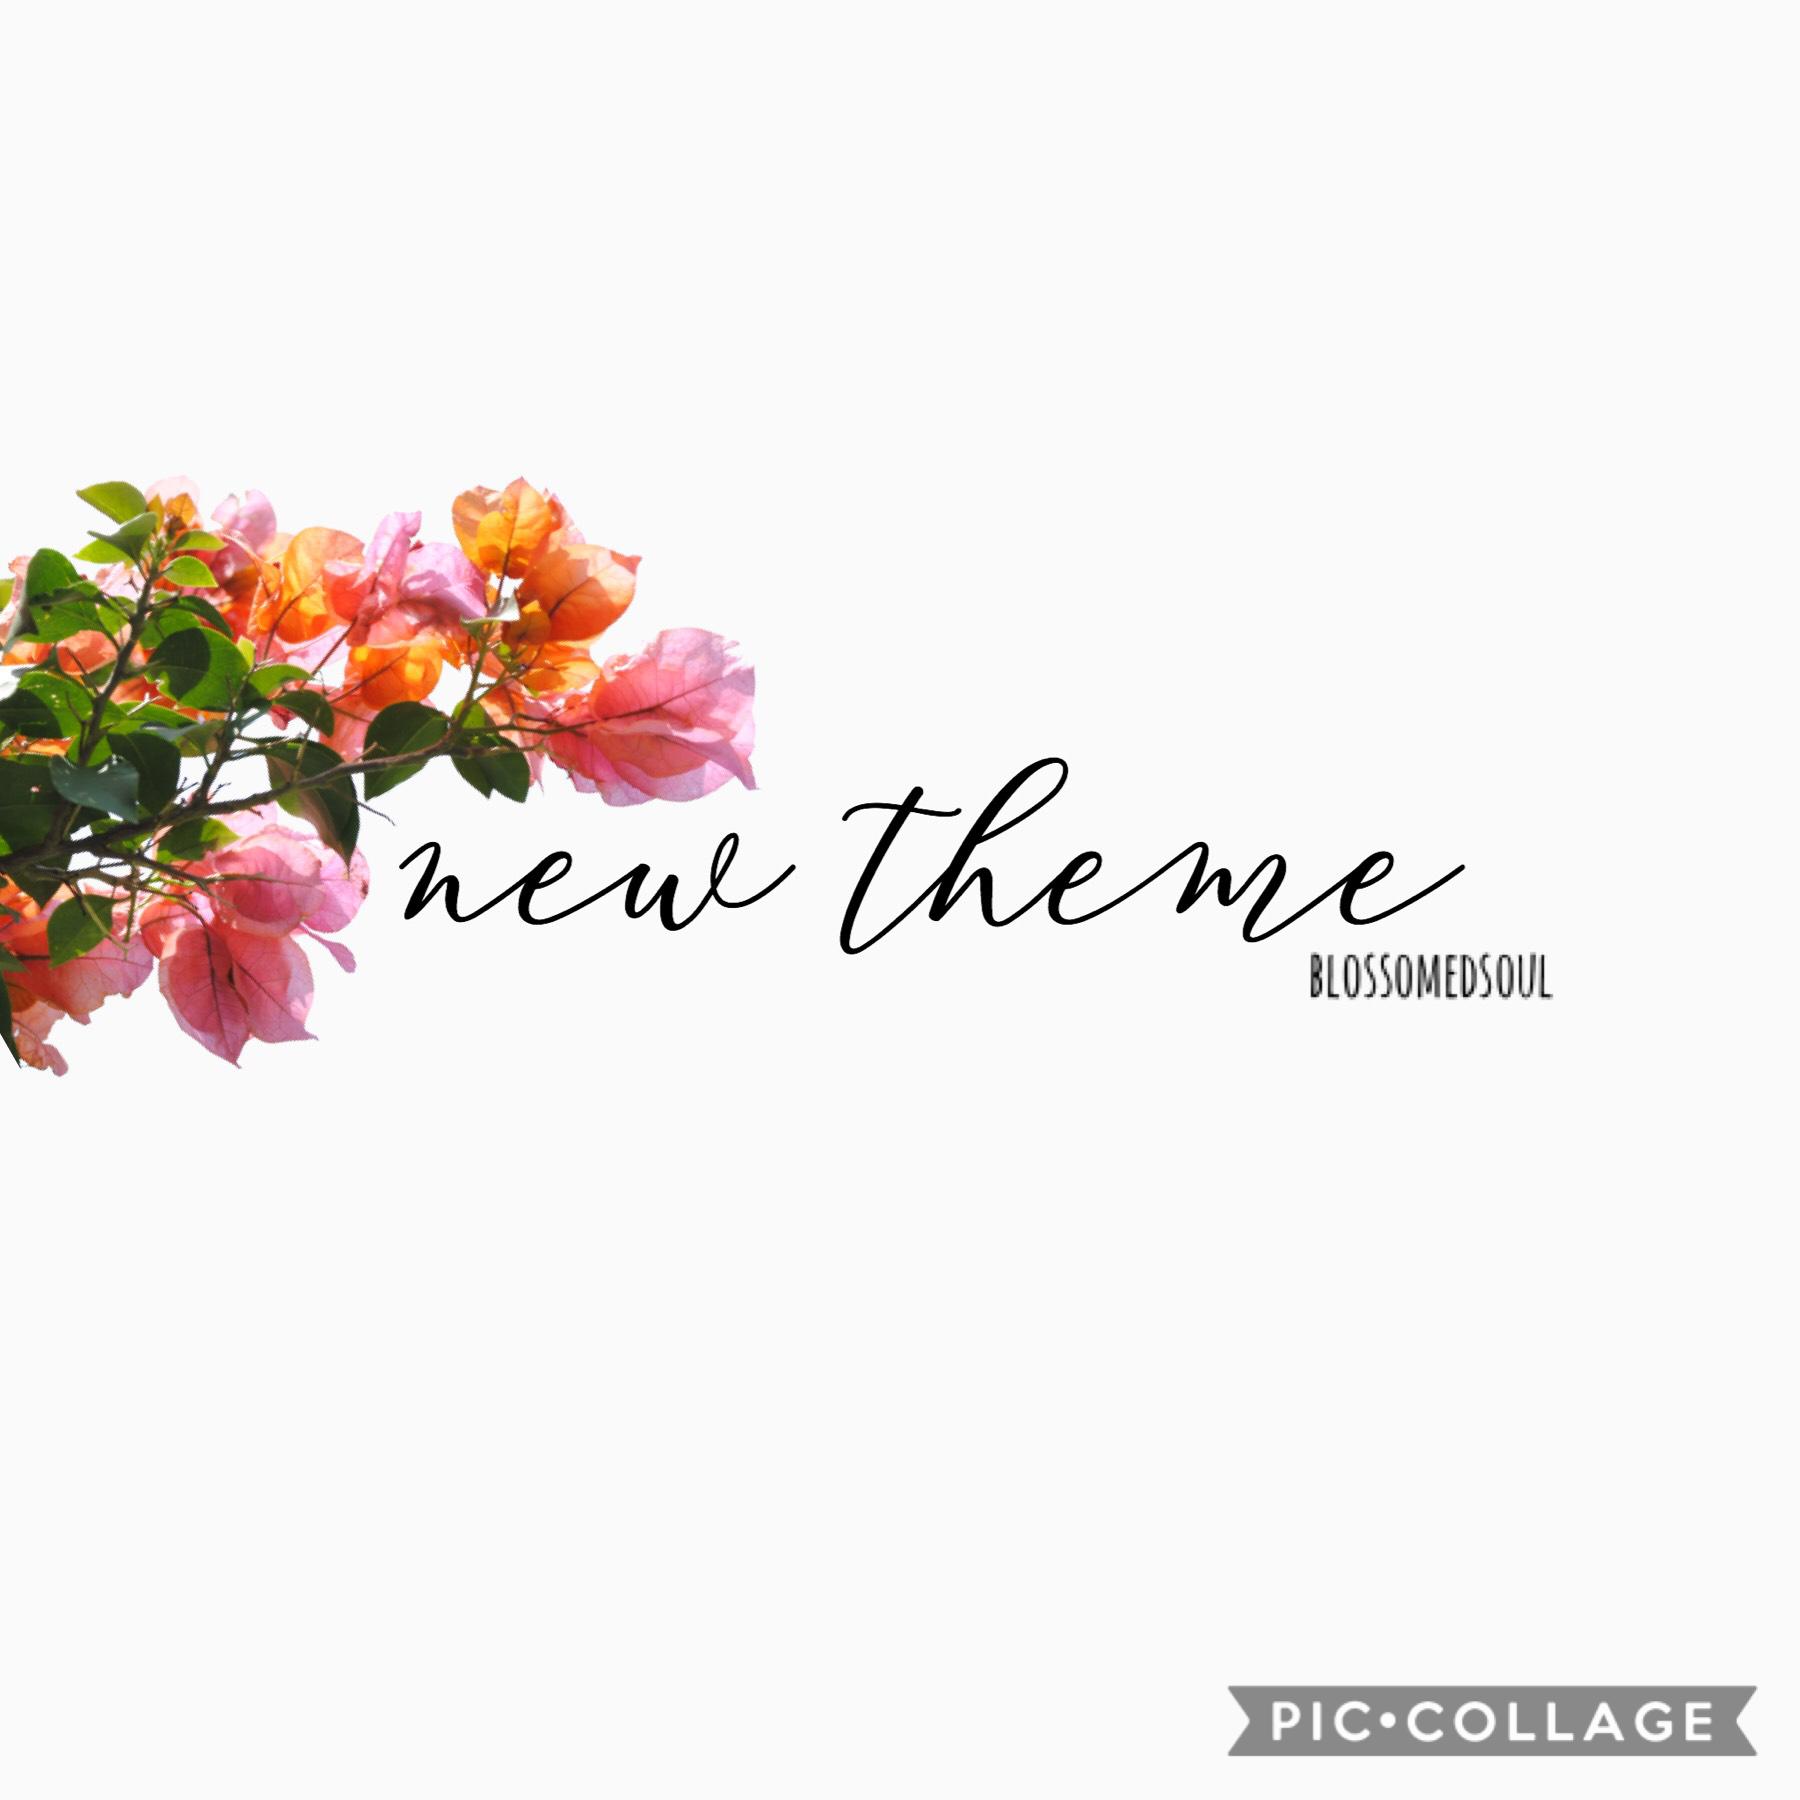 t a p

new theme! i got a little tired of the minimalist one so i’m trying something new ♥️✨🌿